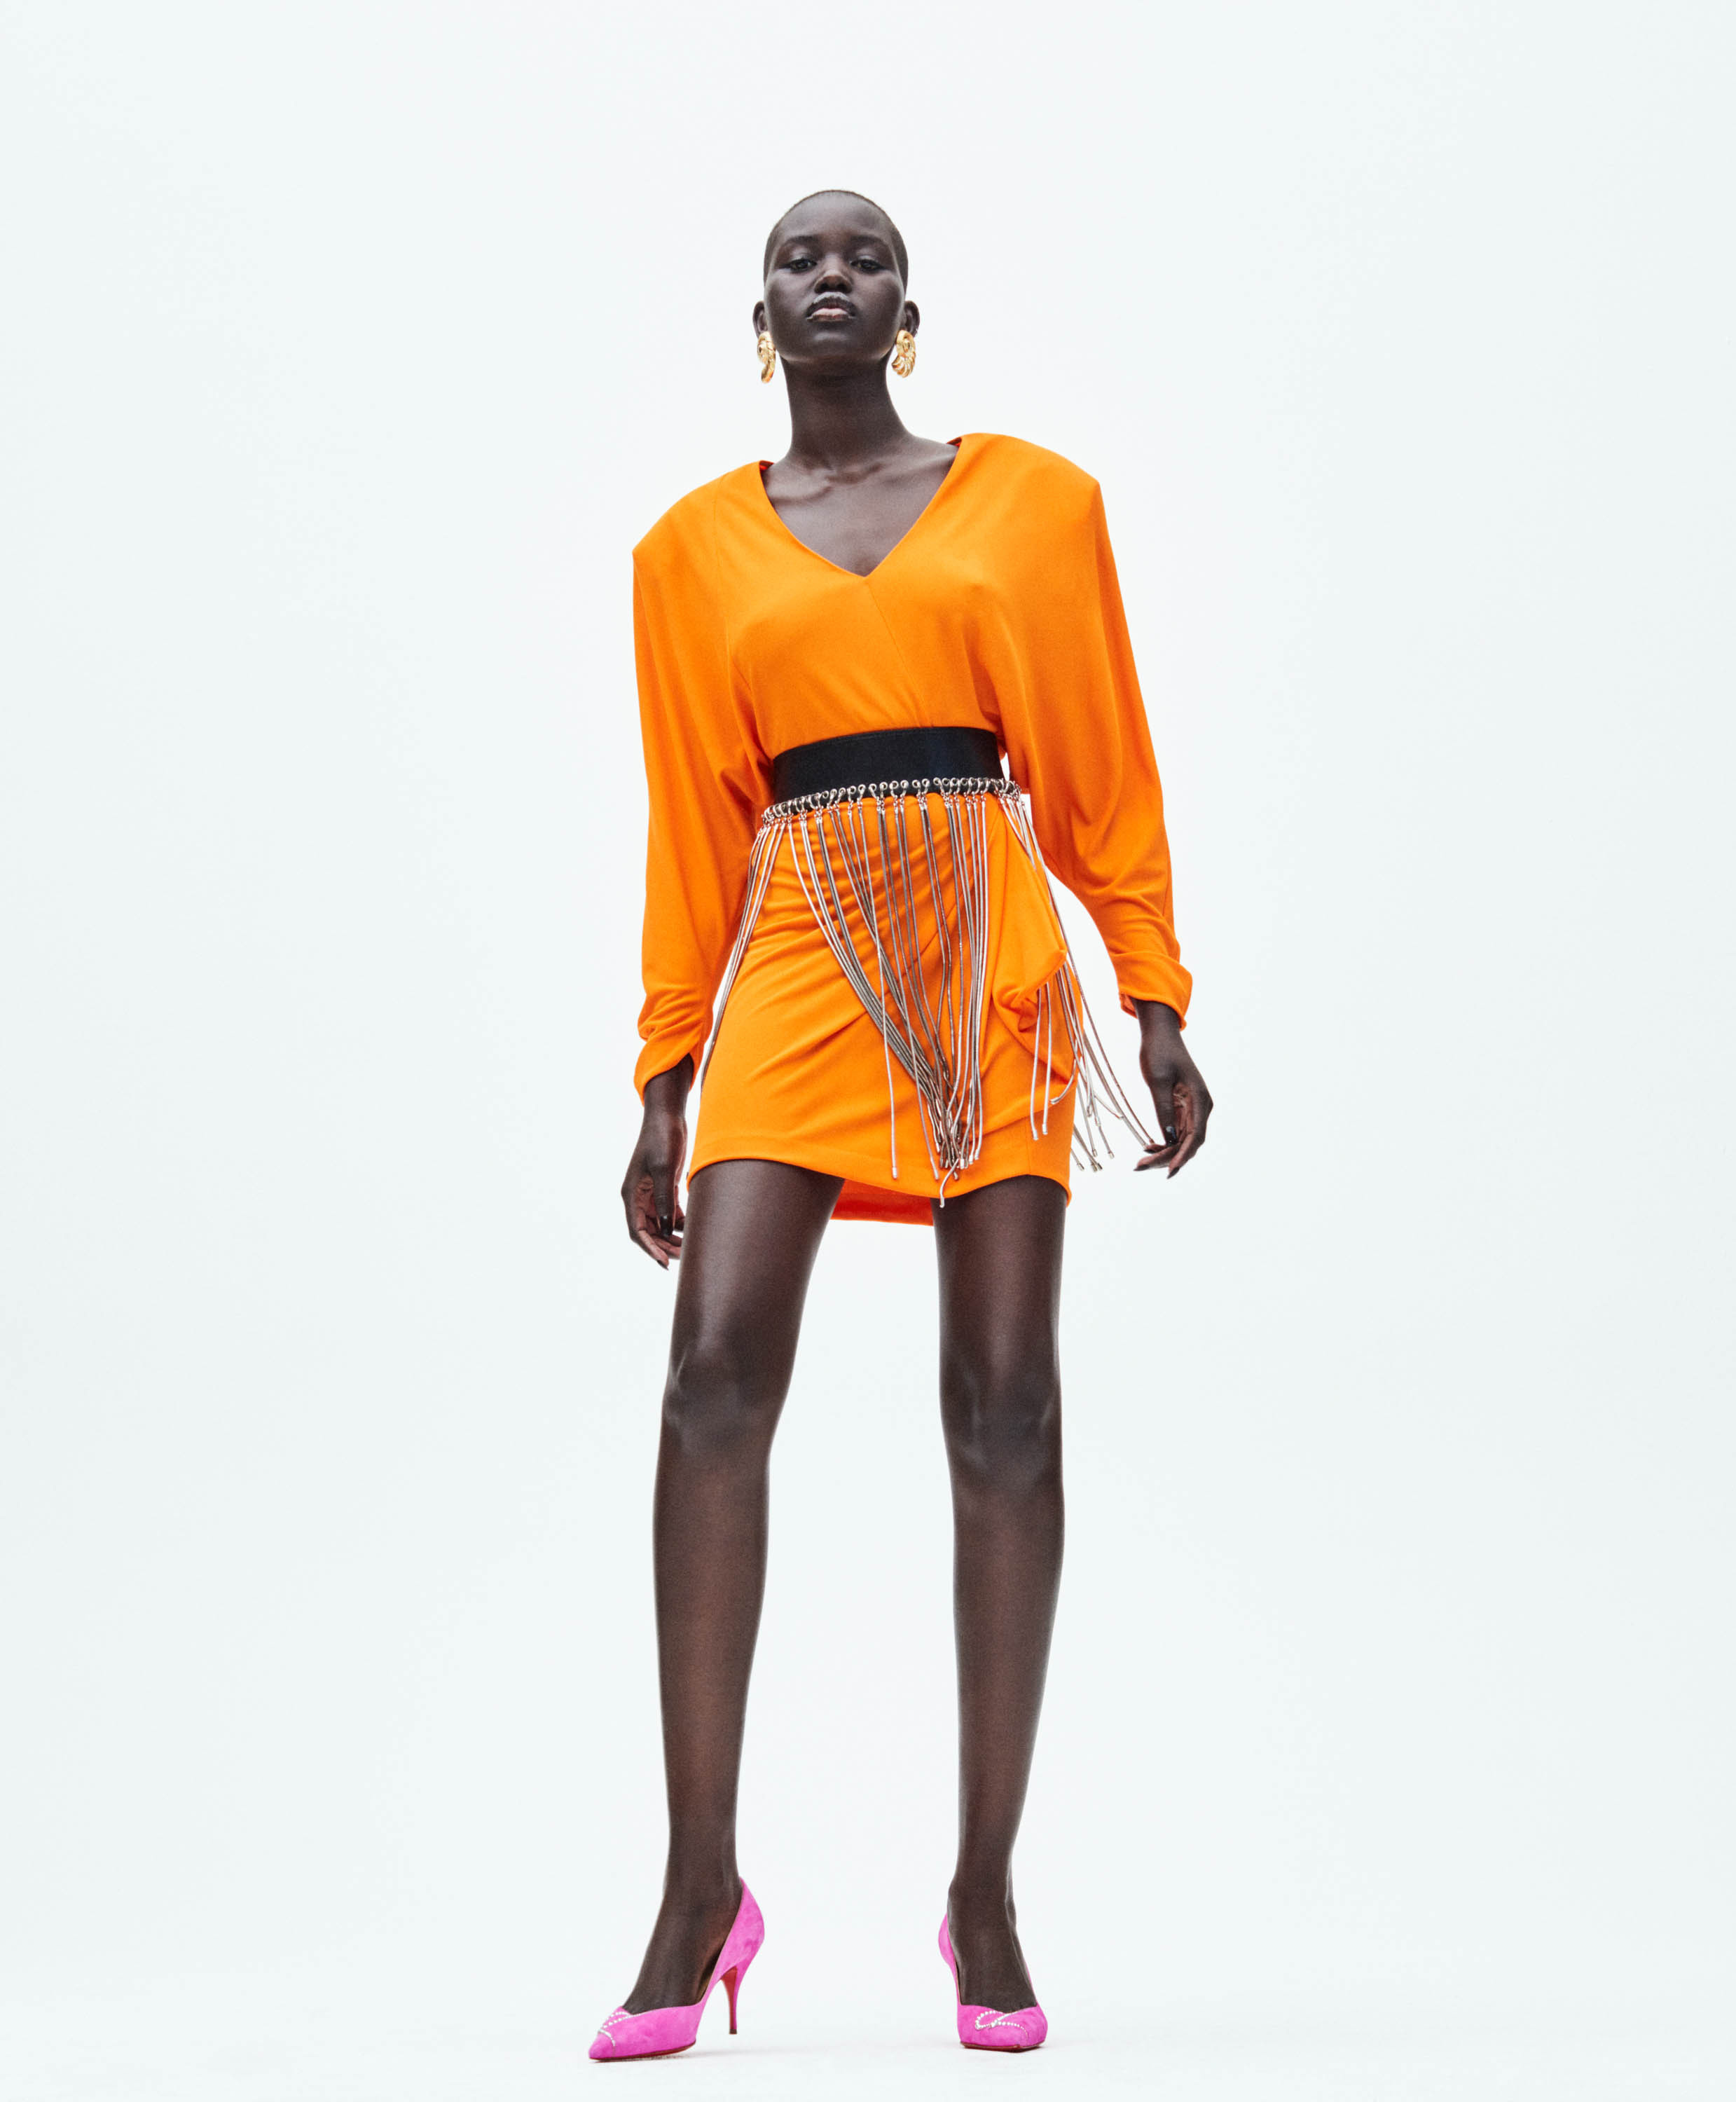 Photos n°8 : Adut Akech and her Mile Long Legs